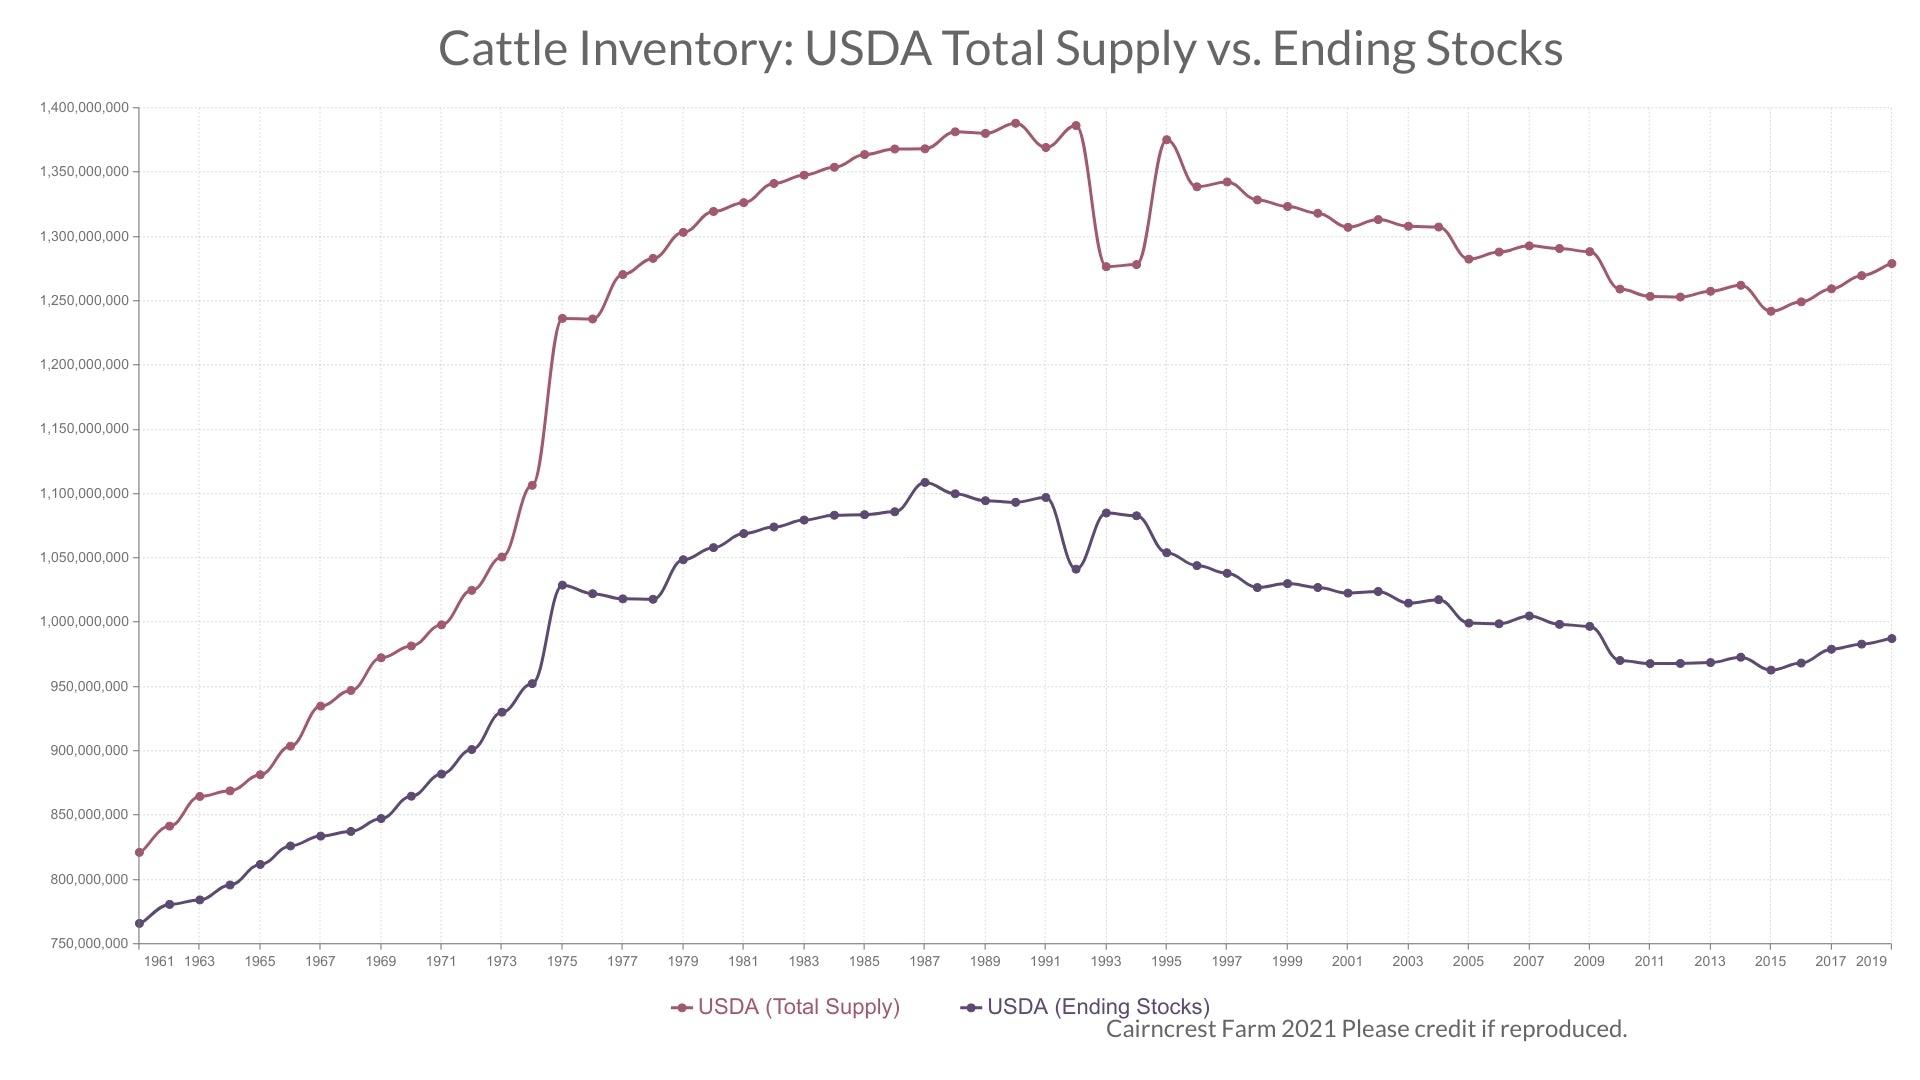 chart of cattle populations based on different USDA data criteria.